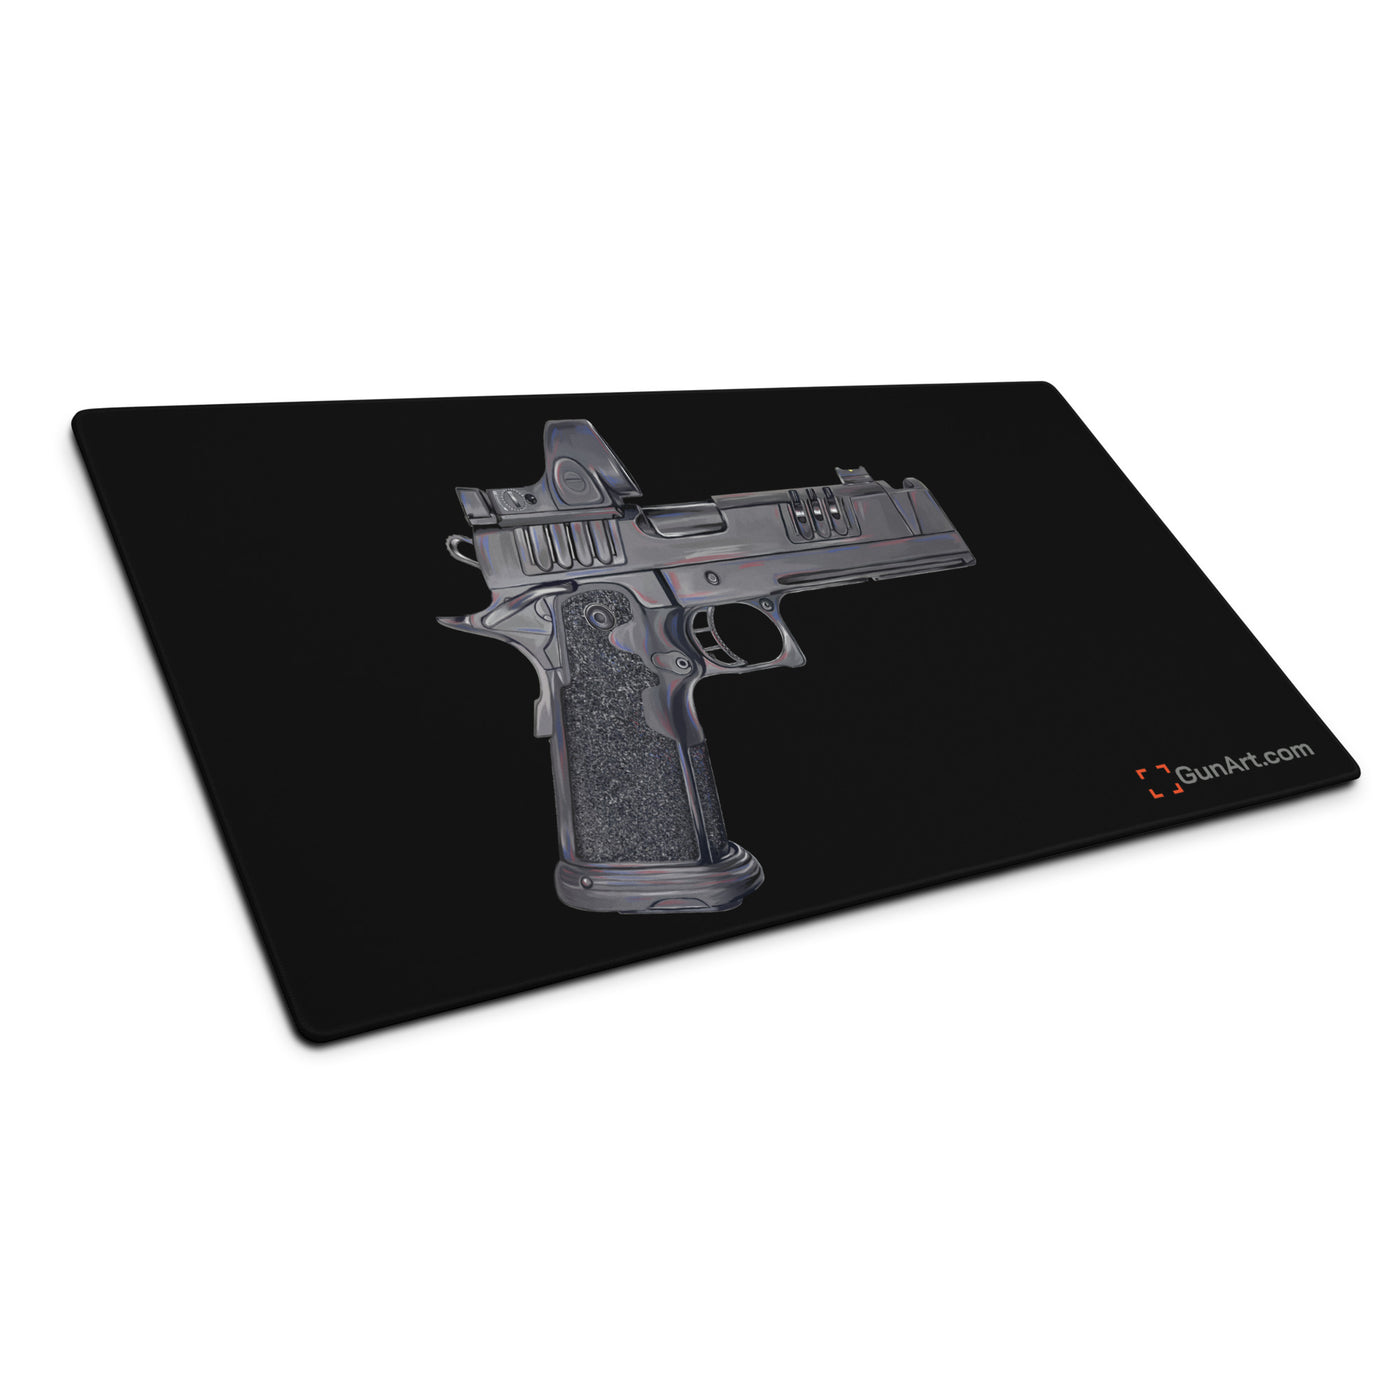 2011 Delta Pistol Gaming Mouse Pad - Just The Piece - Black Background